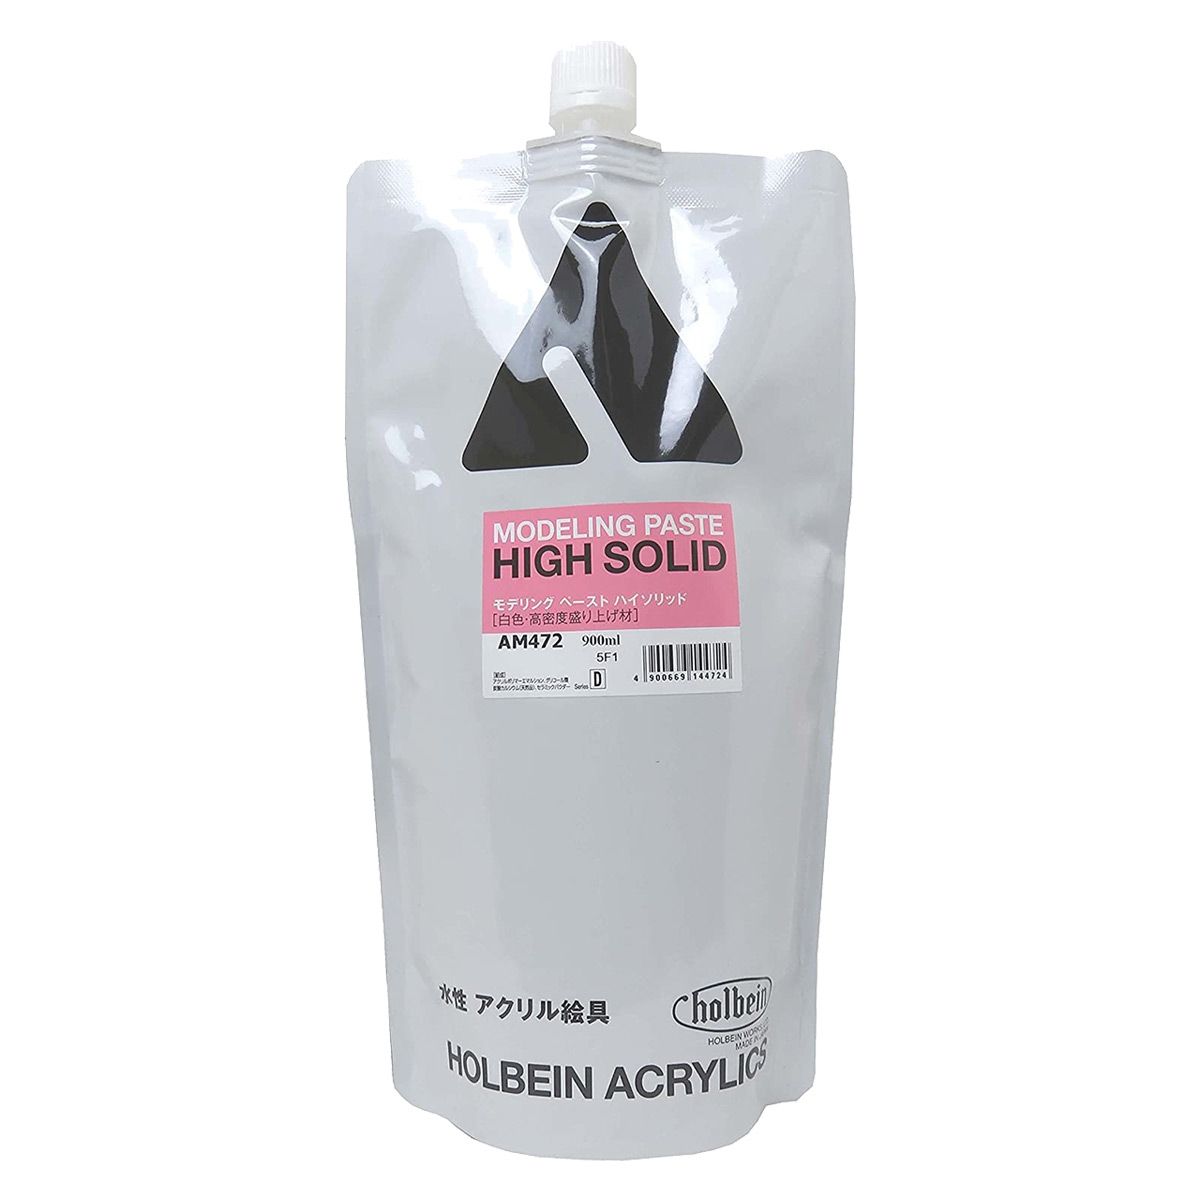 Holbein Artist Acrylic 900ml High Solid Modeling Paste